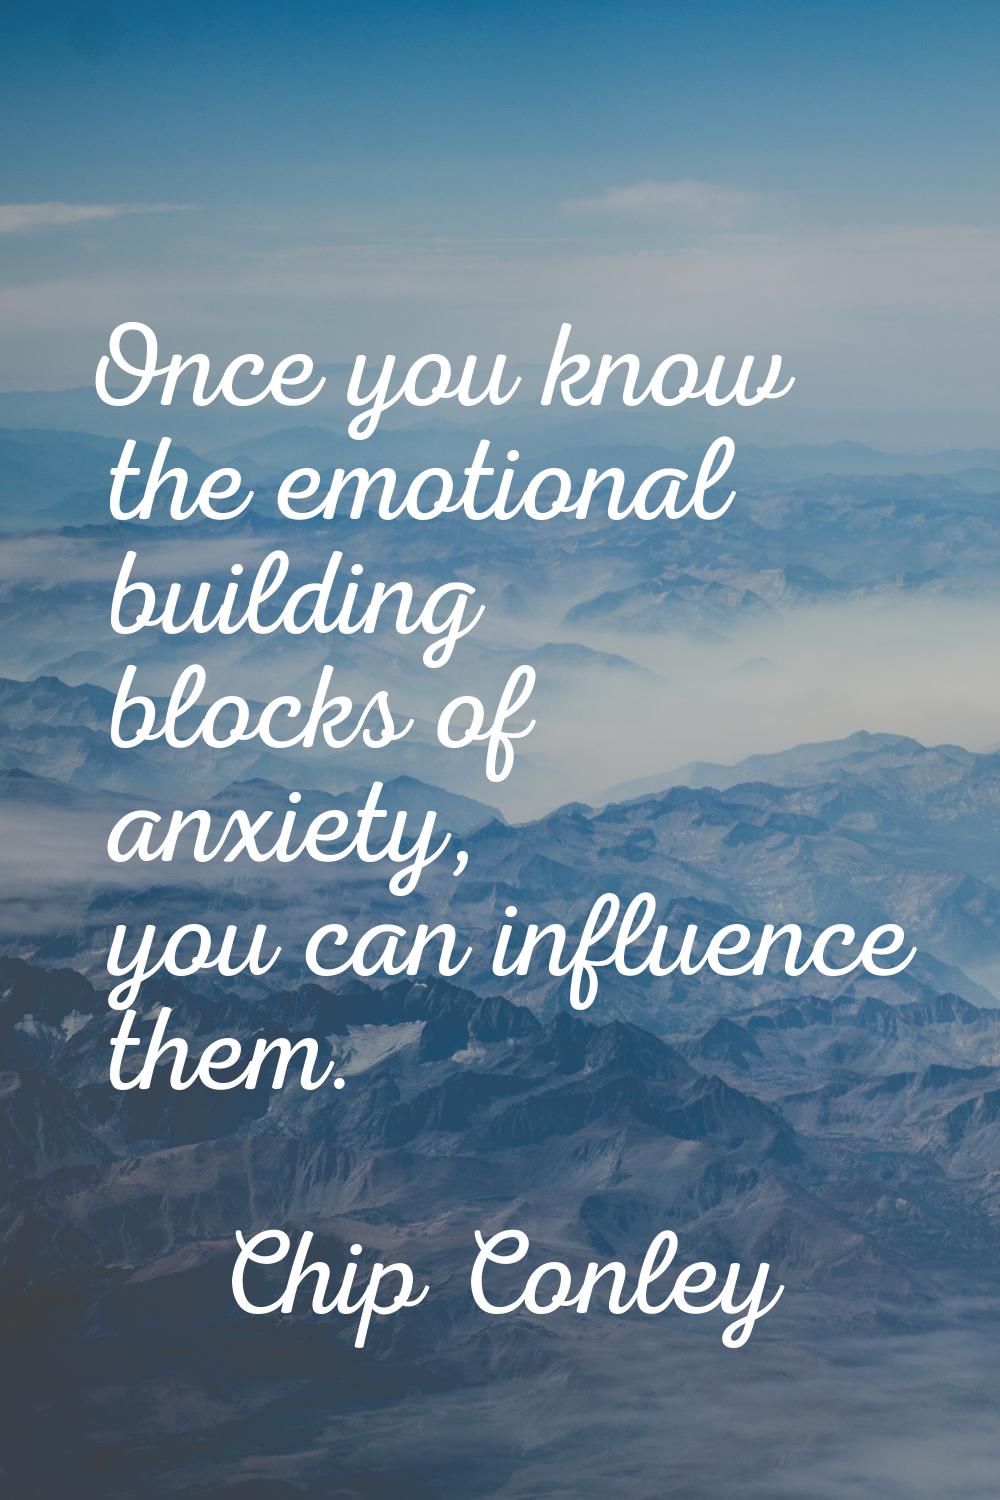 Once you know the emotional building blocks of anxiety, you can influence them.